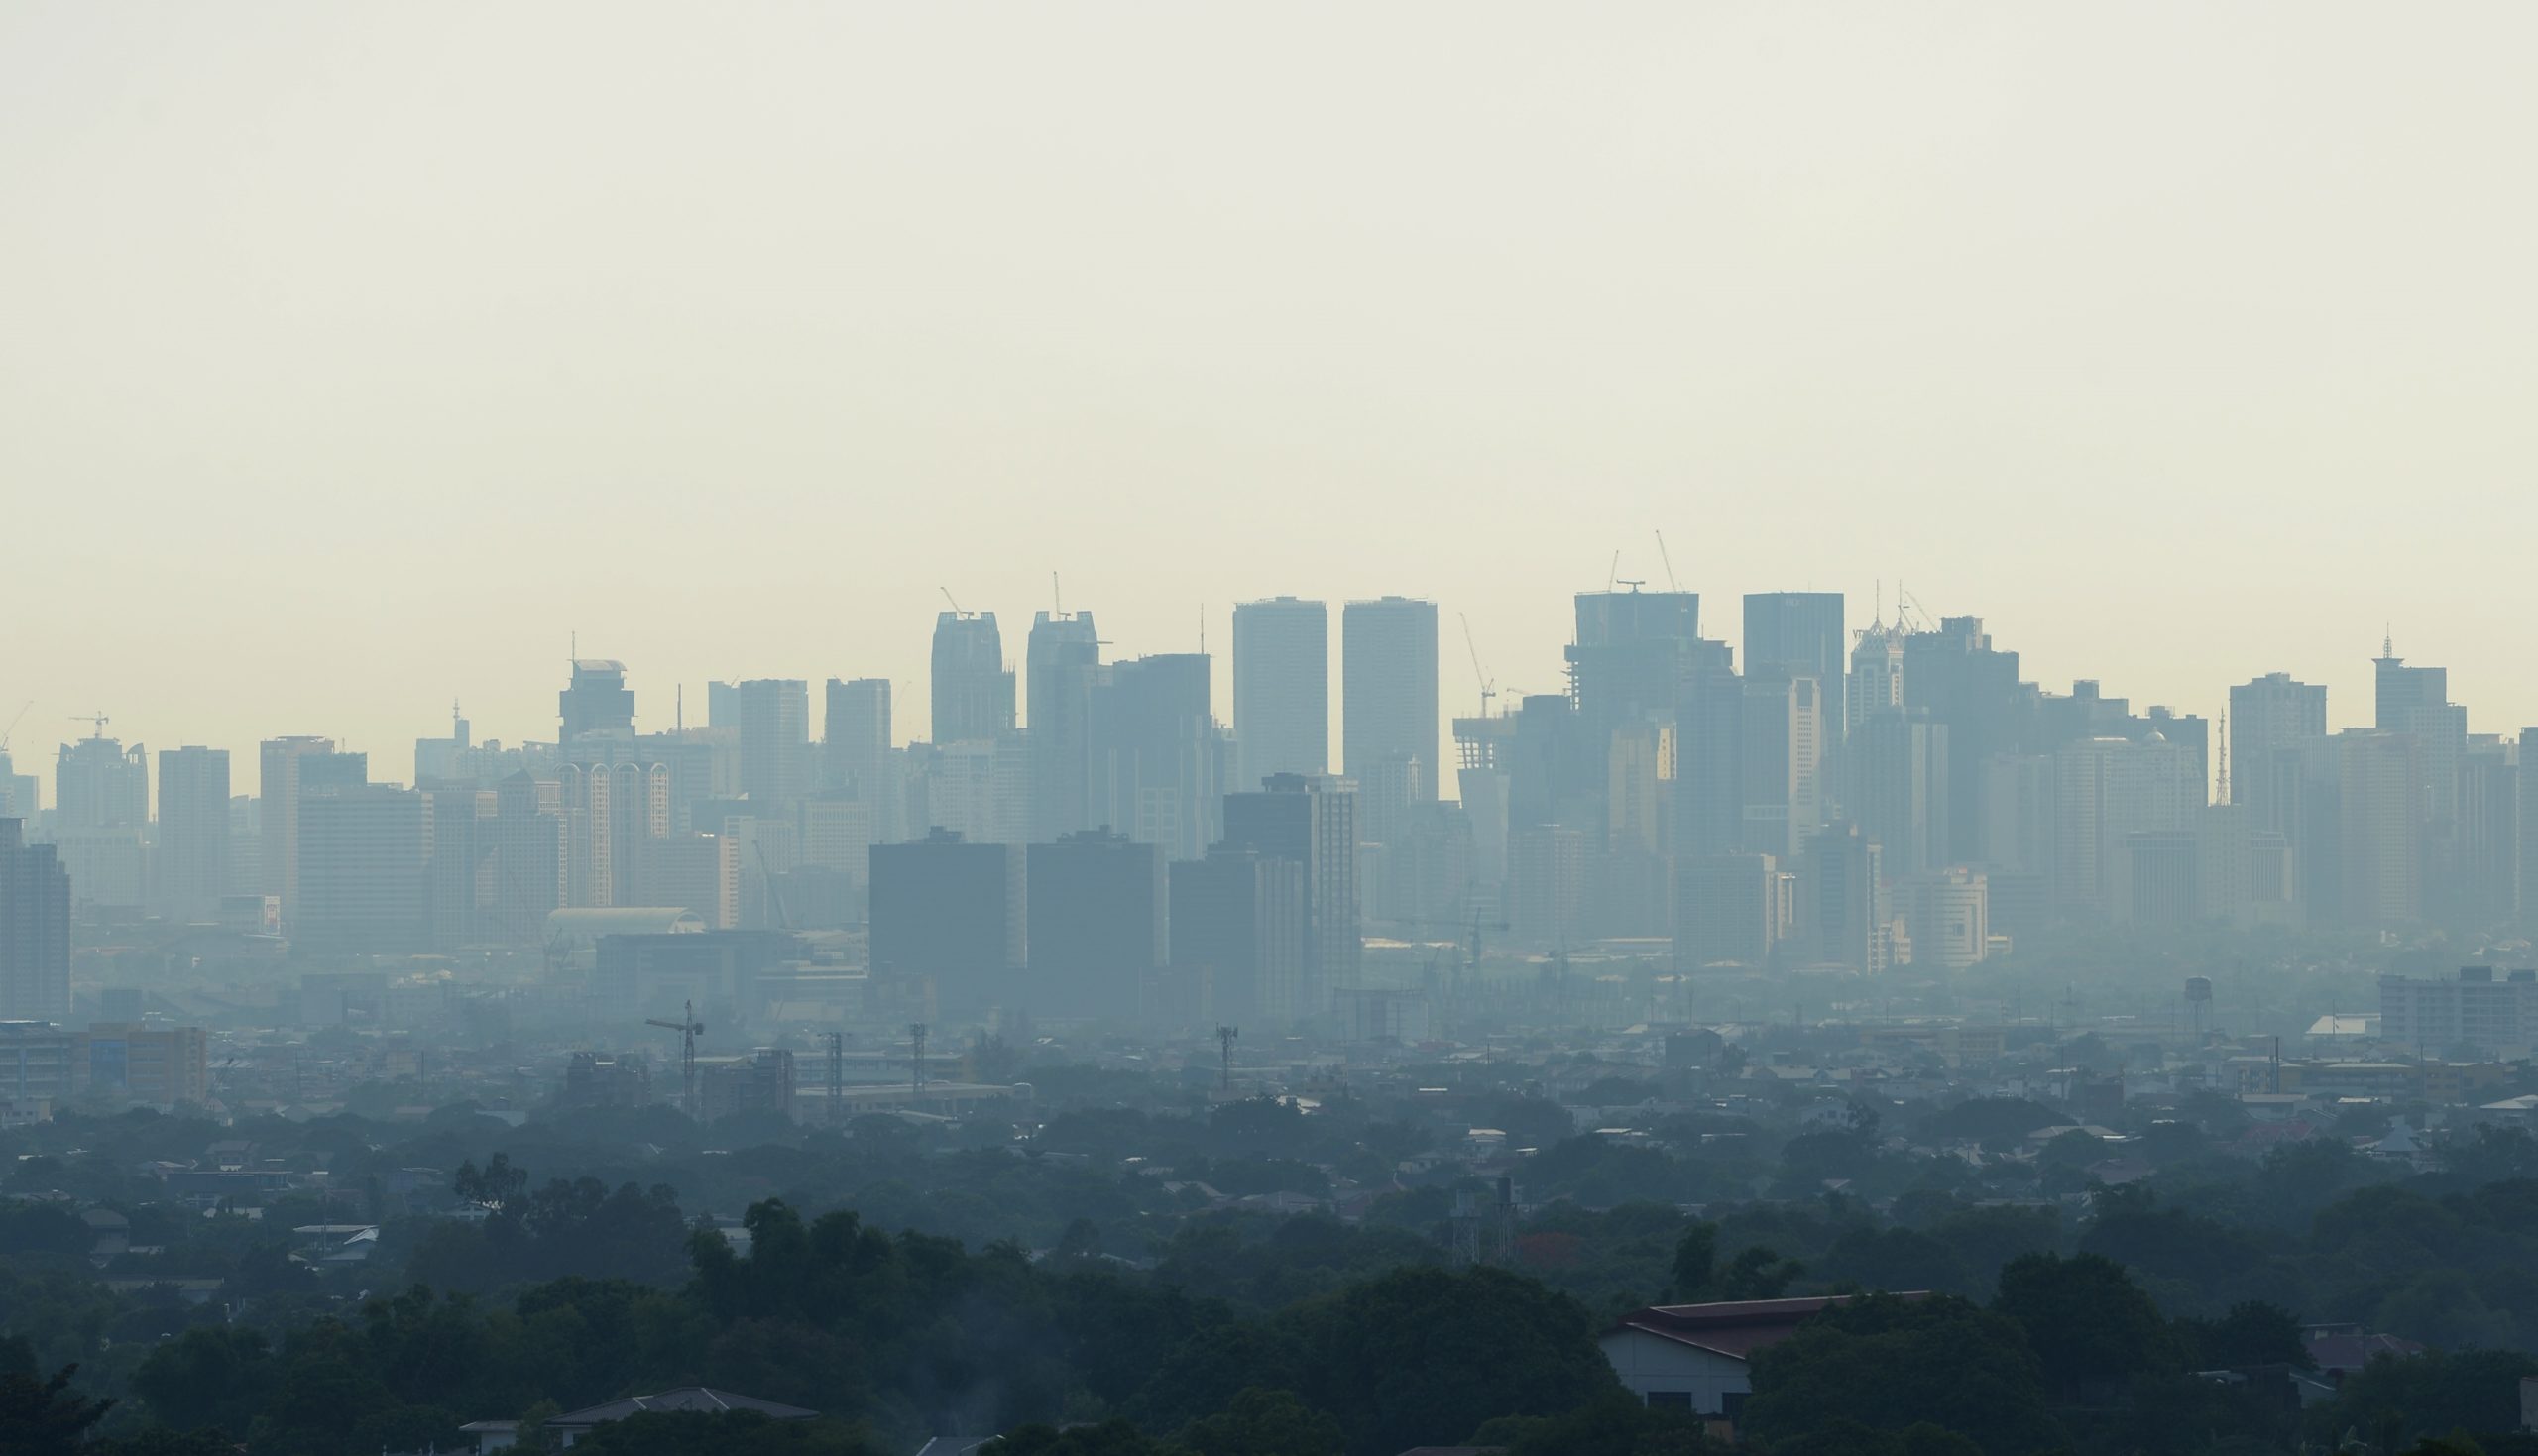 In this photo taken on June 23, 2019 shows smog covering buildings in Manila. (Photo by Ted ALJIBE / AFP)